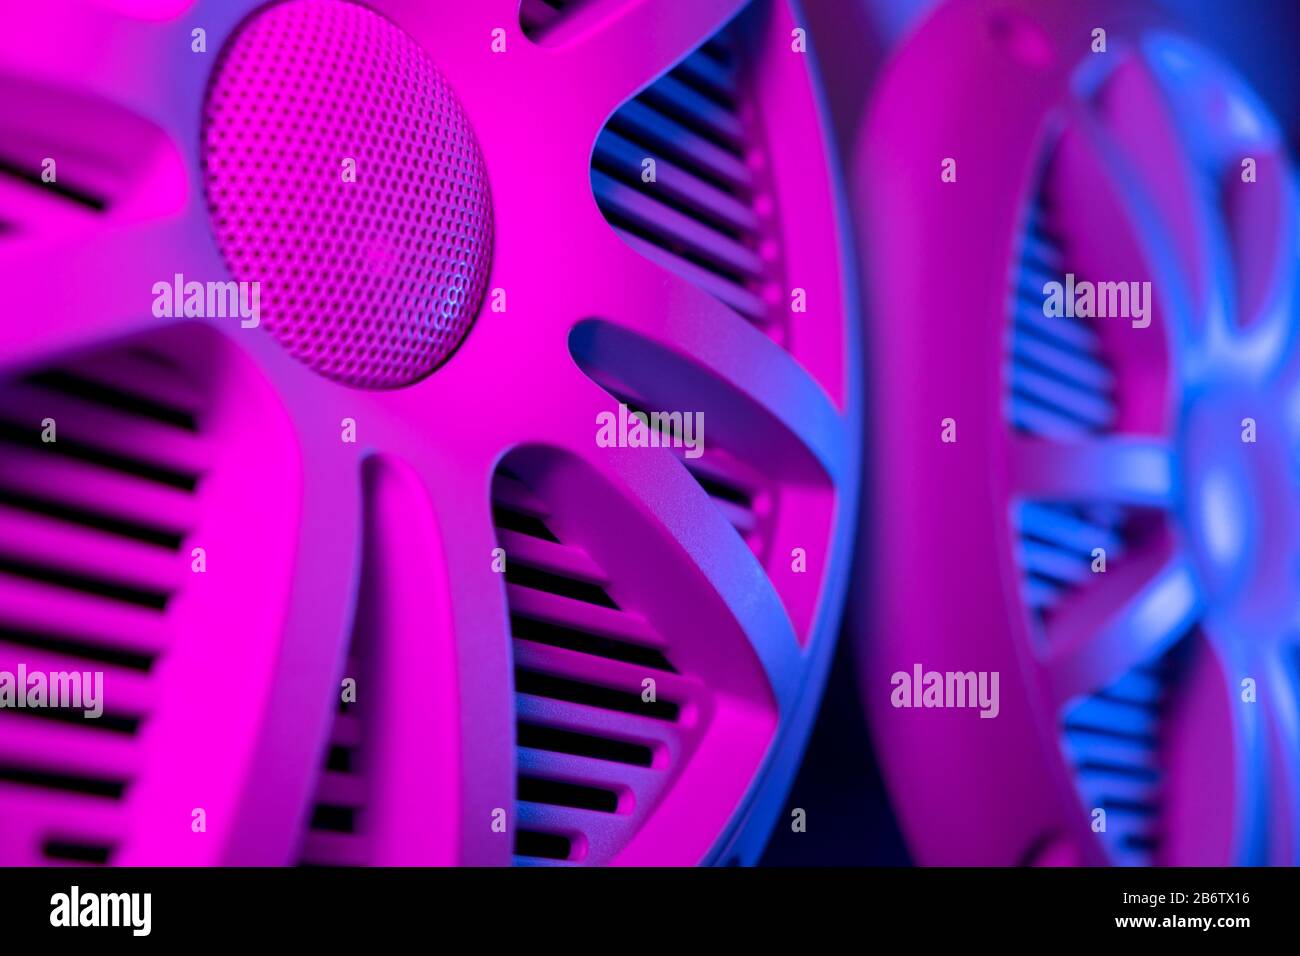 Colorful lights of car stereo and car speakers background.  Car music audio speaker in blue and pink tones. Modern car audio system close up Stock Photo